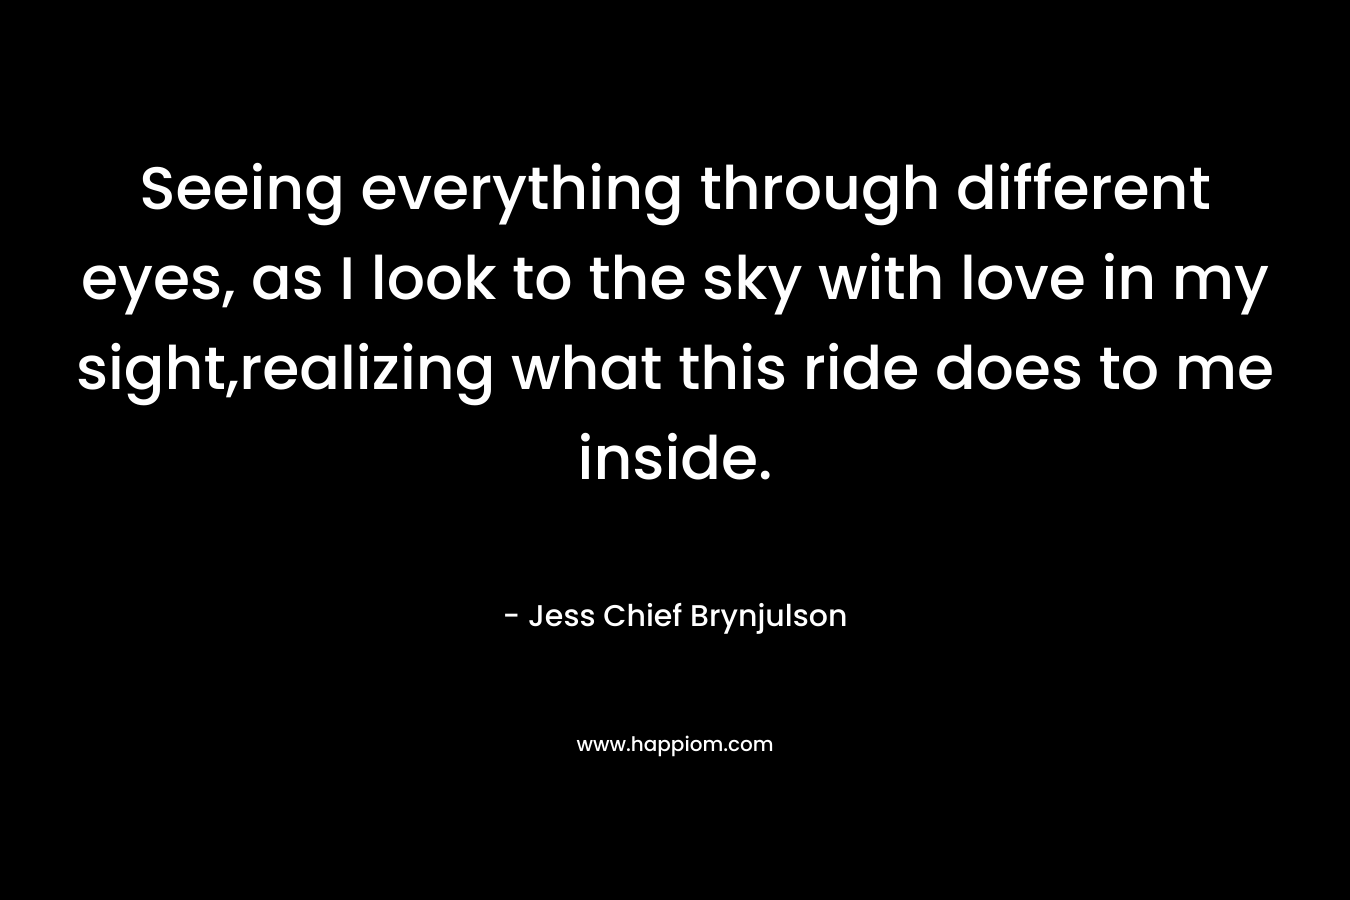 Seeing everything through different eyes, as I look to the sky with love in my sight,realizing what this ride does to me inside. – Jess Chief Brynjulson